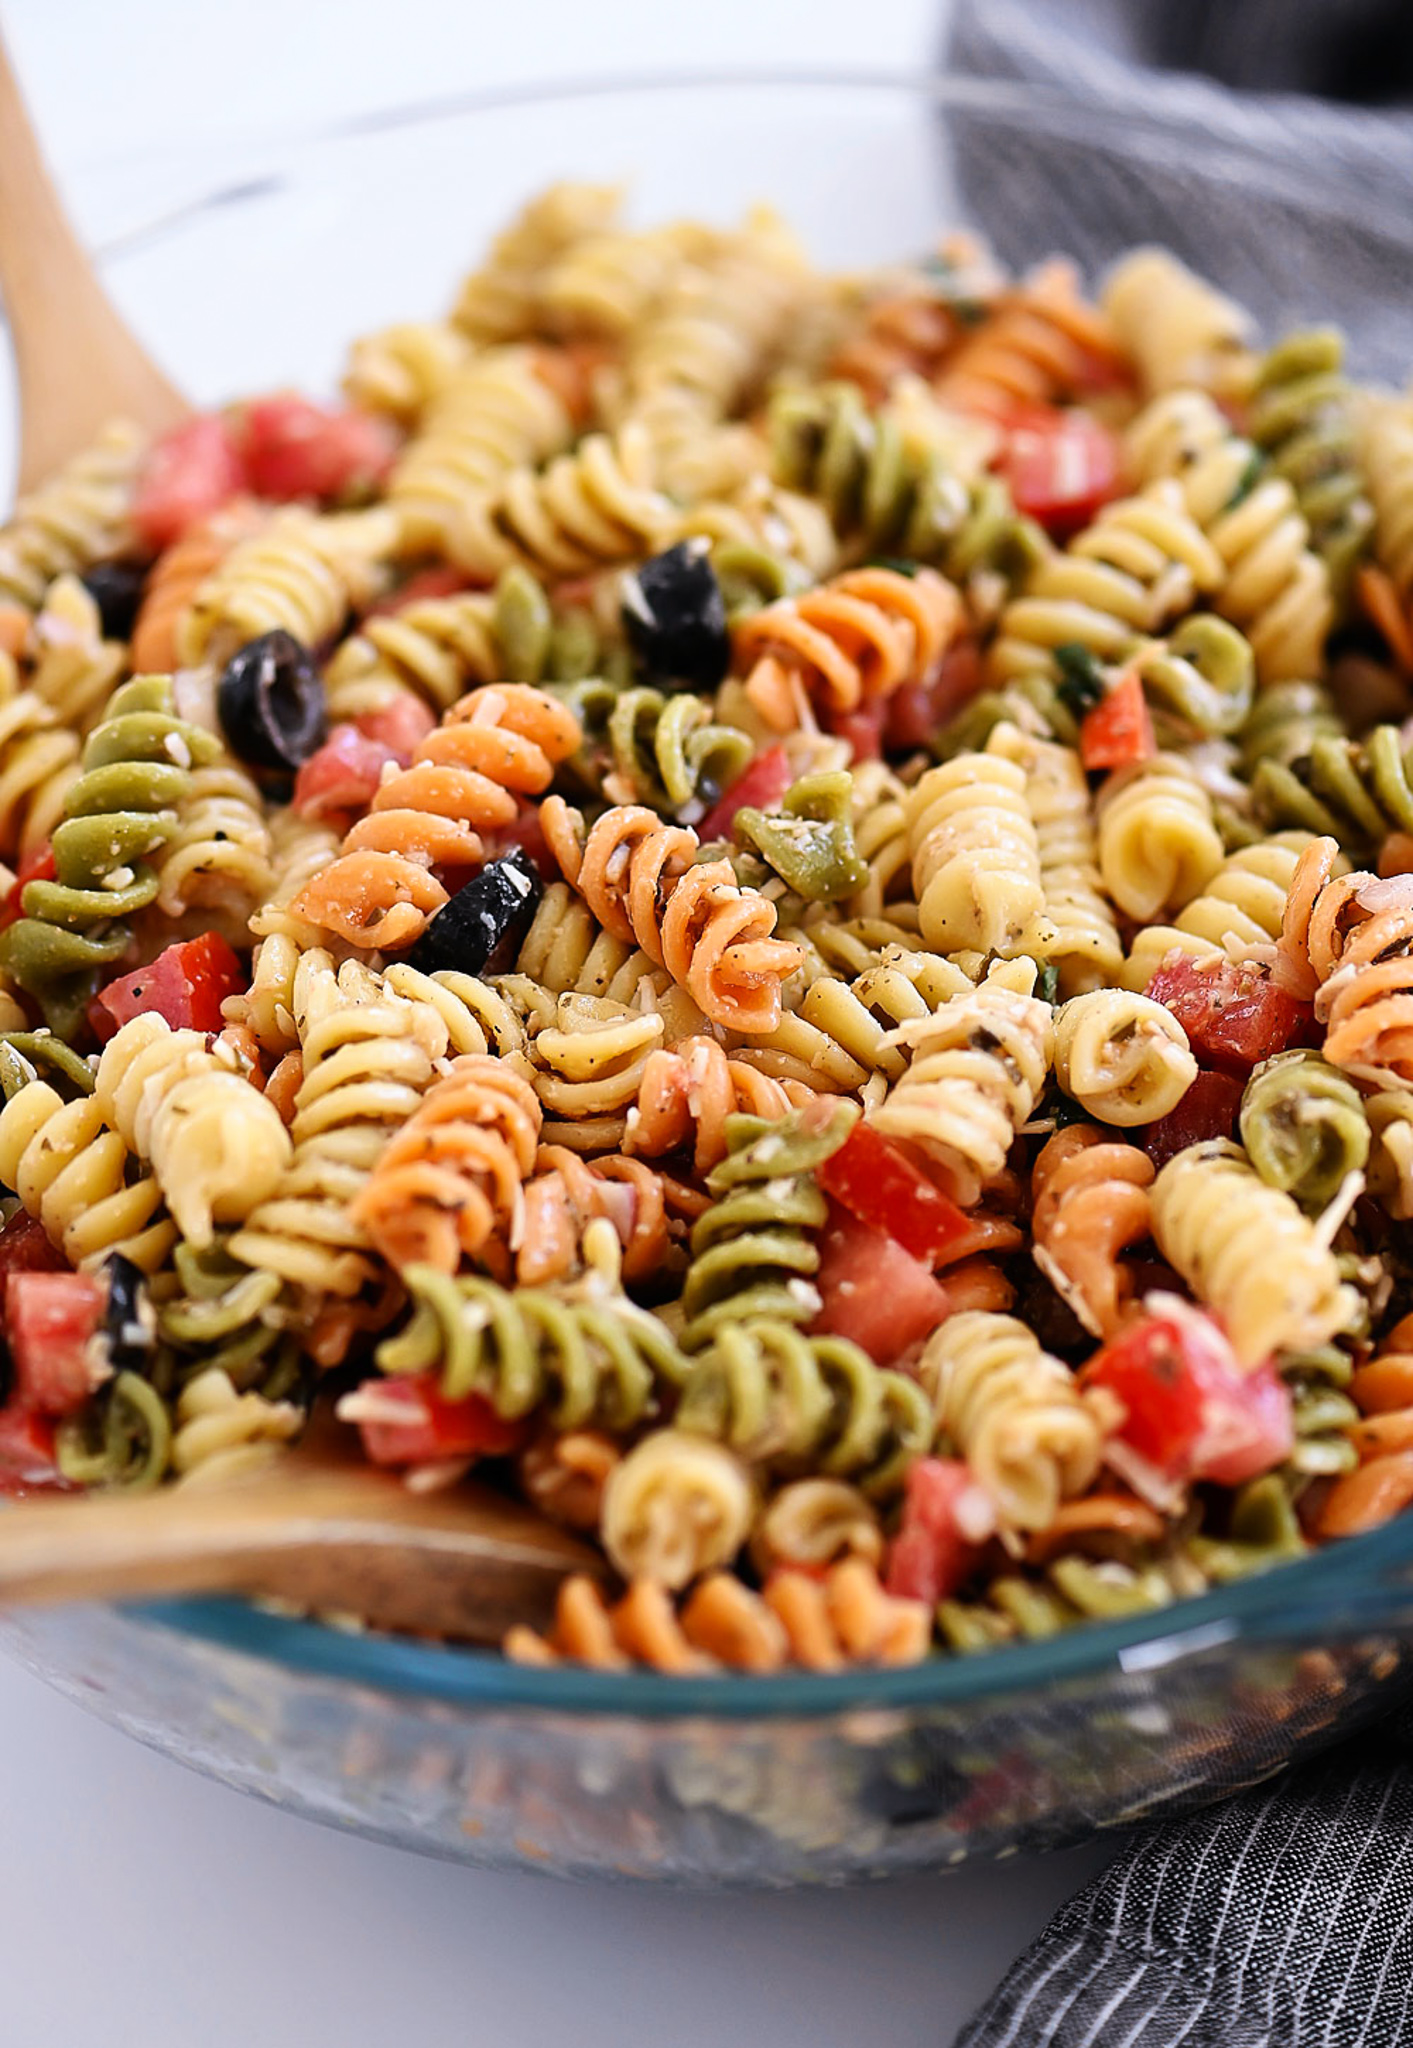 Tri Color Pasta Salad is filled with noodles, fresh veggies, and Parmesan cheese. It’s tossed in a creamy Caesar dressing and basil pesto for one flavor-packed dish.